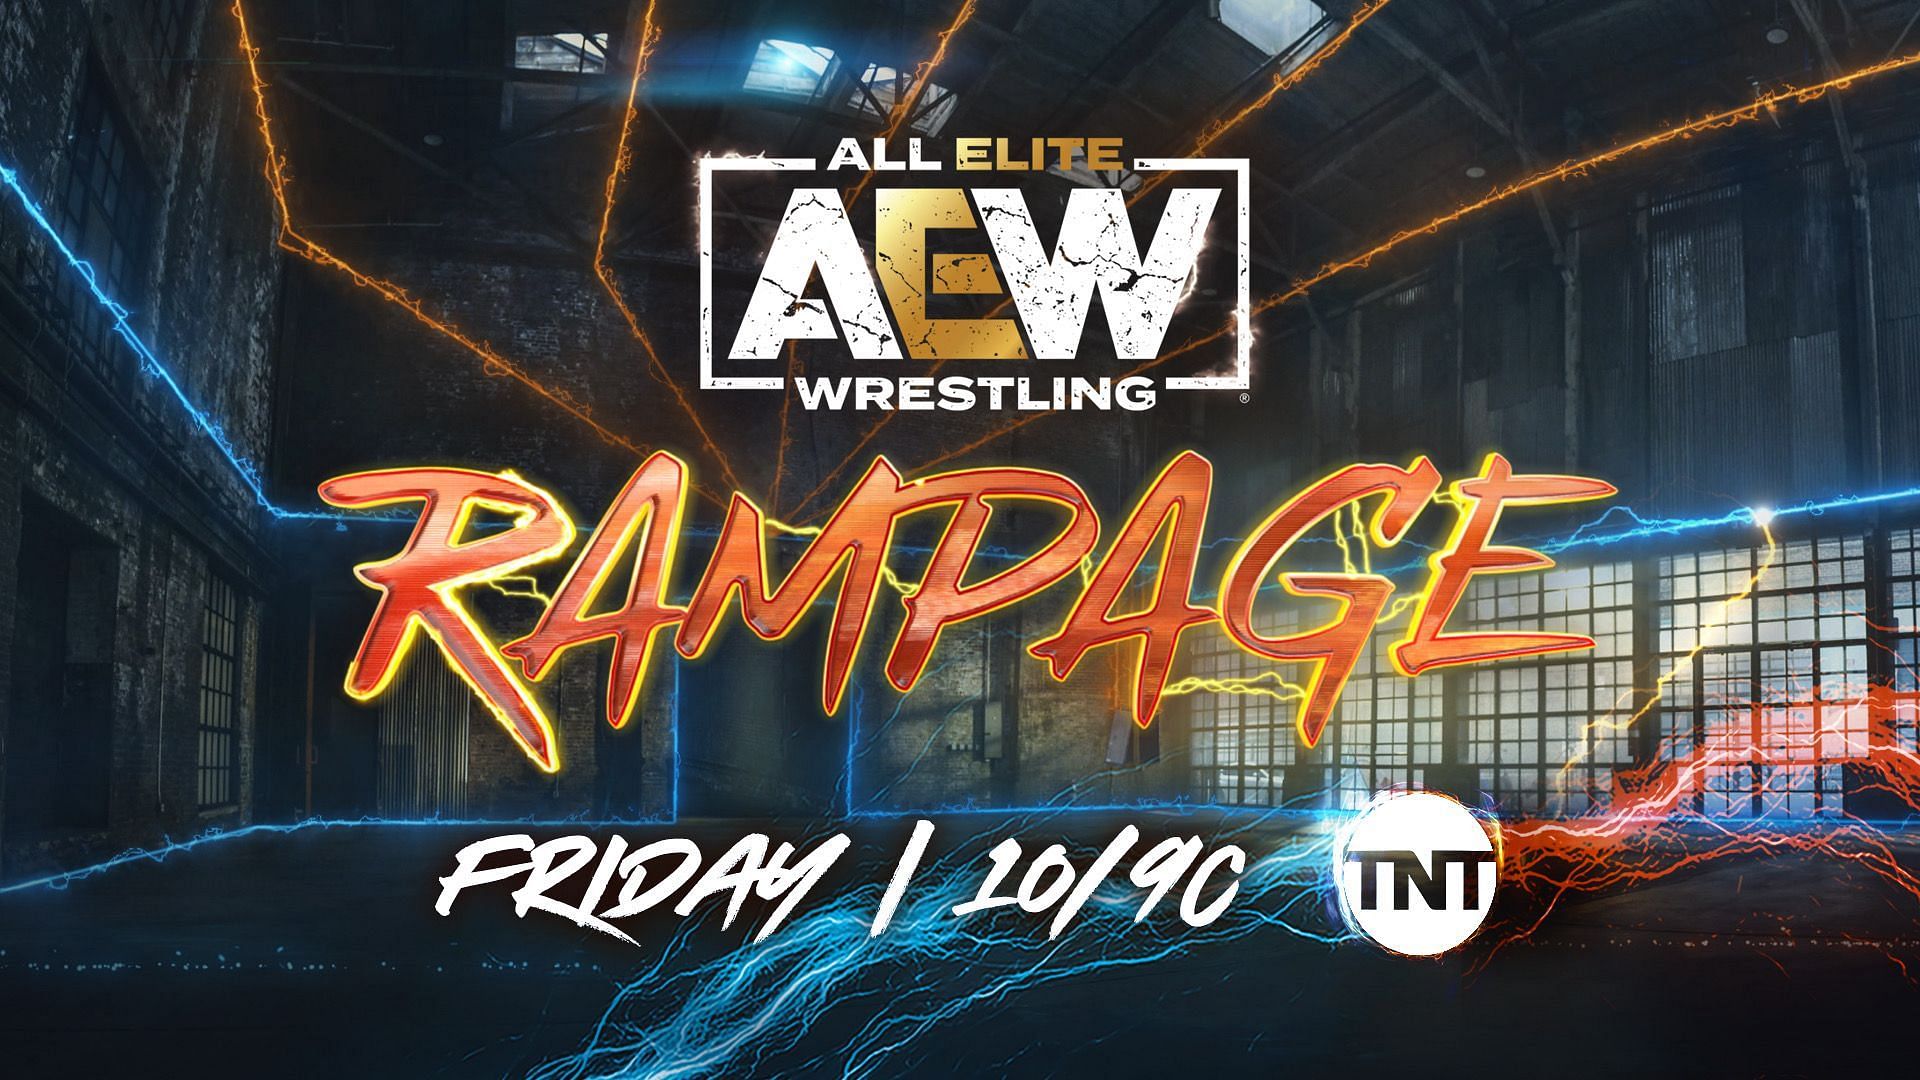 A rising AEW star had an injury scare on Rampage